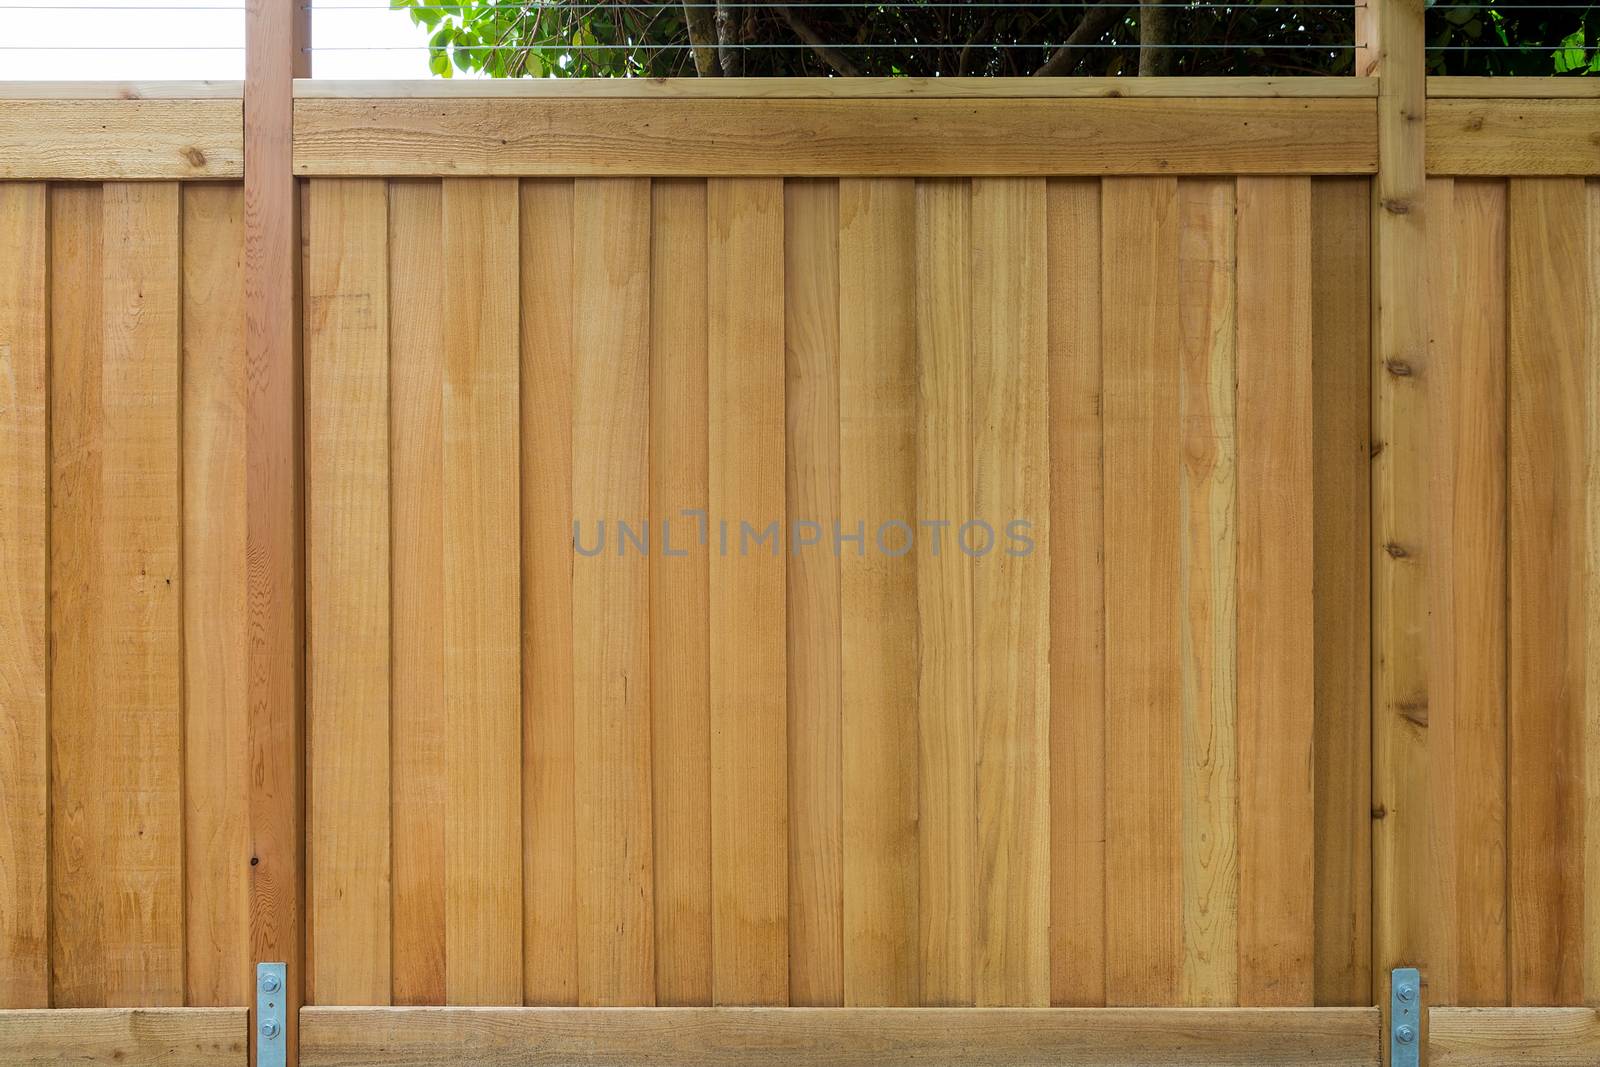 New Cedar Wood Fencing Front View by Davidgn